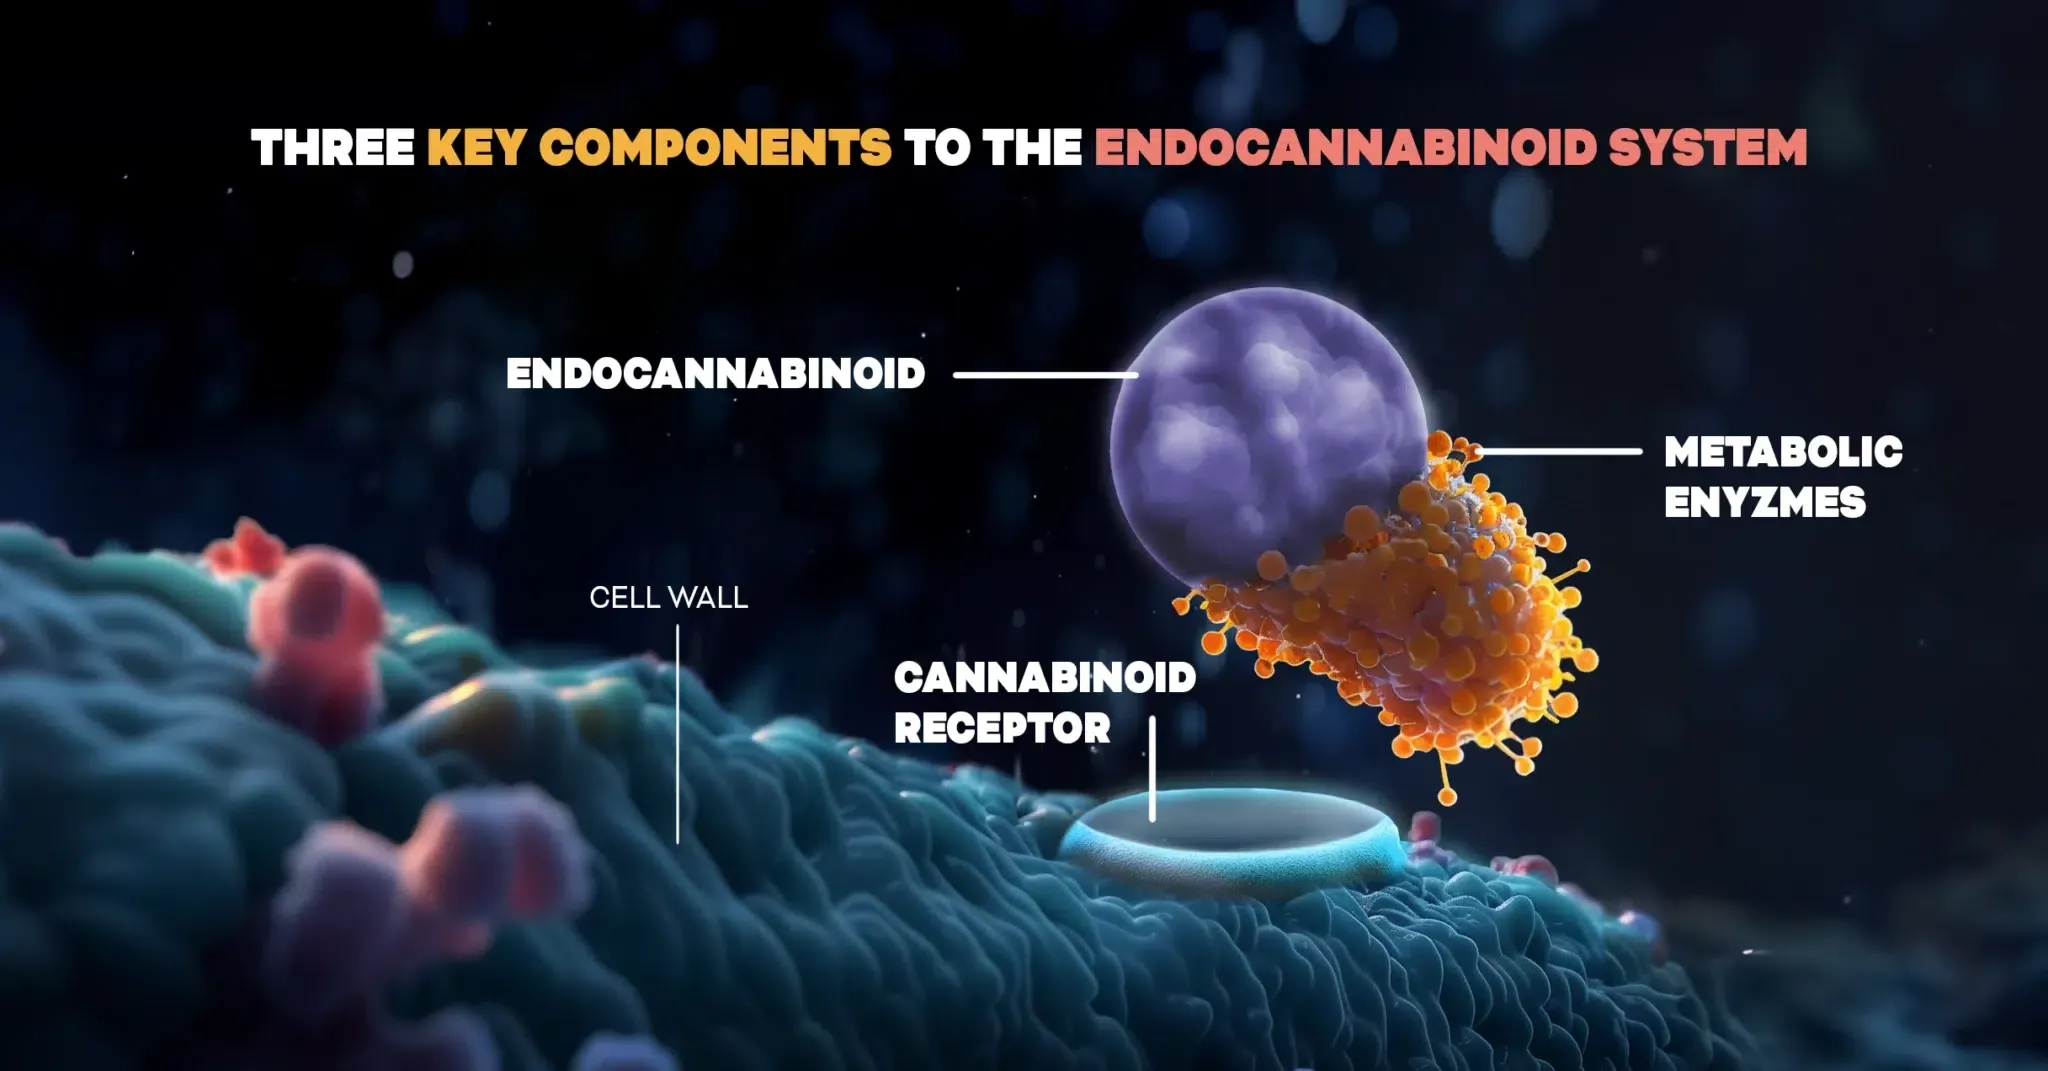 This scientific illustration visually highlights the essential parts of the ecs, with the title 'three key components of the endocannabinoid system. ' set against a microscopic cellular backdrop, it identifies an 'endocannabinoid,' illustrated as a purple sphere; a 'cannabinoid receptor,' shown as a socket on the blue cell wall; and 'metabolic enzymes,' depicted as orange and yellow clusters engaging with the endocannabinoid. All key parts are prominently displayed, indicating the importance of these three components in the functioning of the ecs. This vivid visualization removes any confusion and is great for educational purposes.